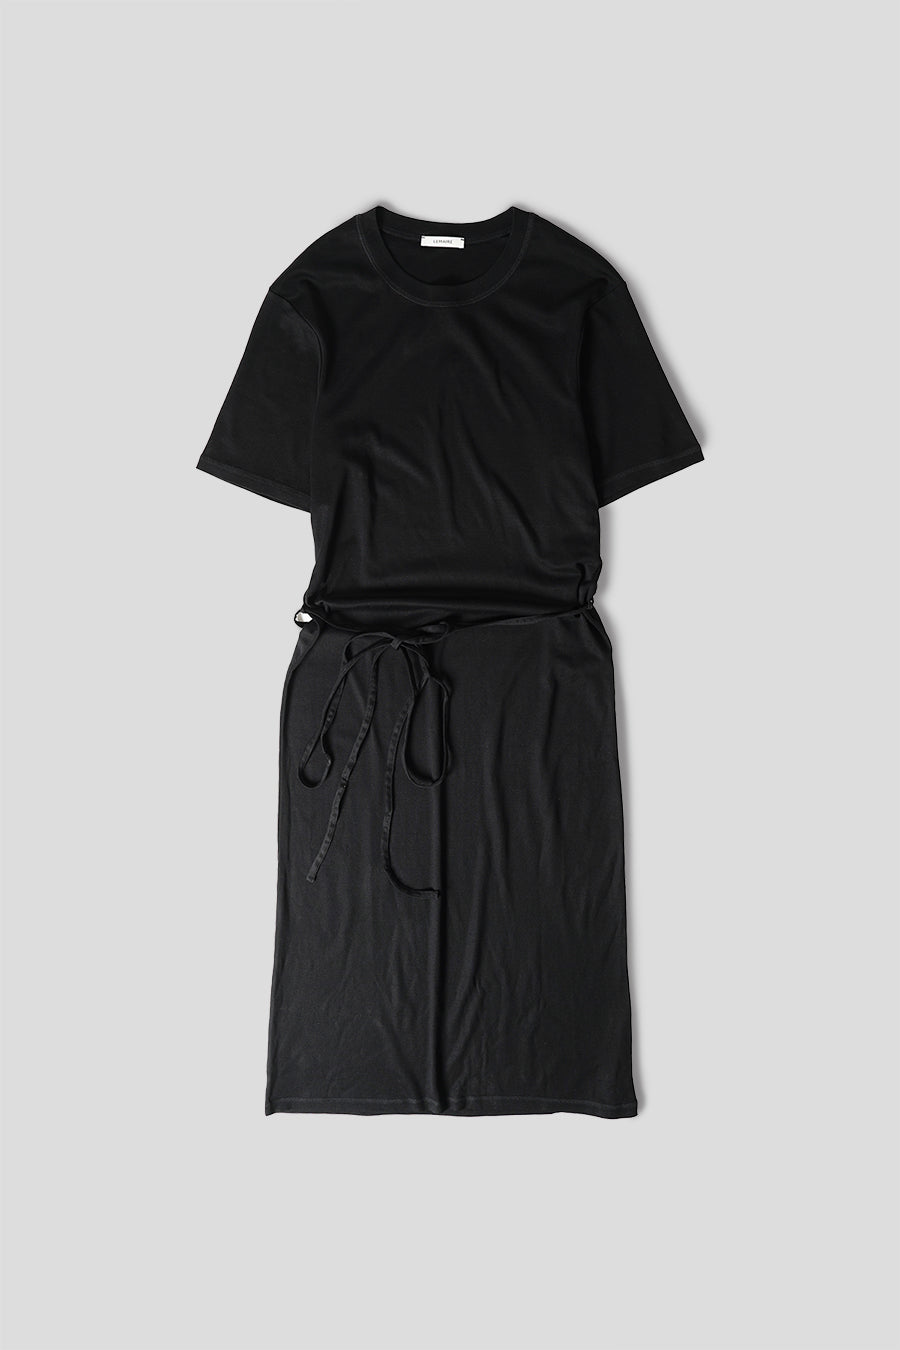 LEMAIRE - BLACK RIBBED AND BELTED T-SHIRT DRESS - LE LABO STORE